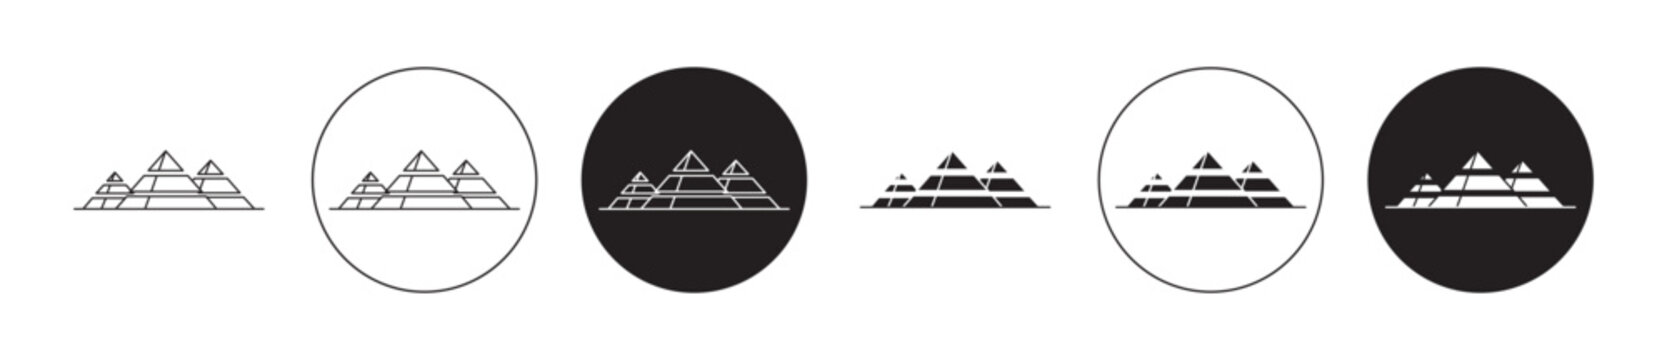 Pyramids icon set. egyptian great pyramids vector symbol in black filled and outlined style.